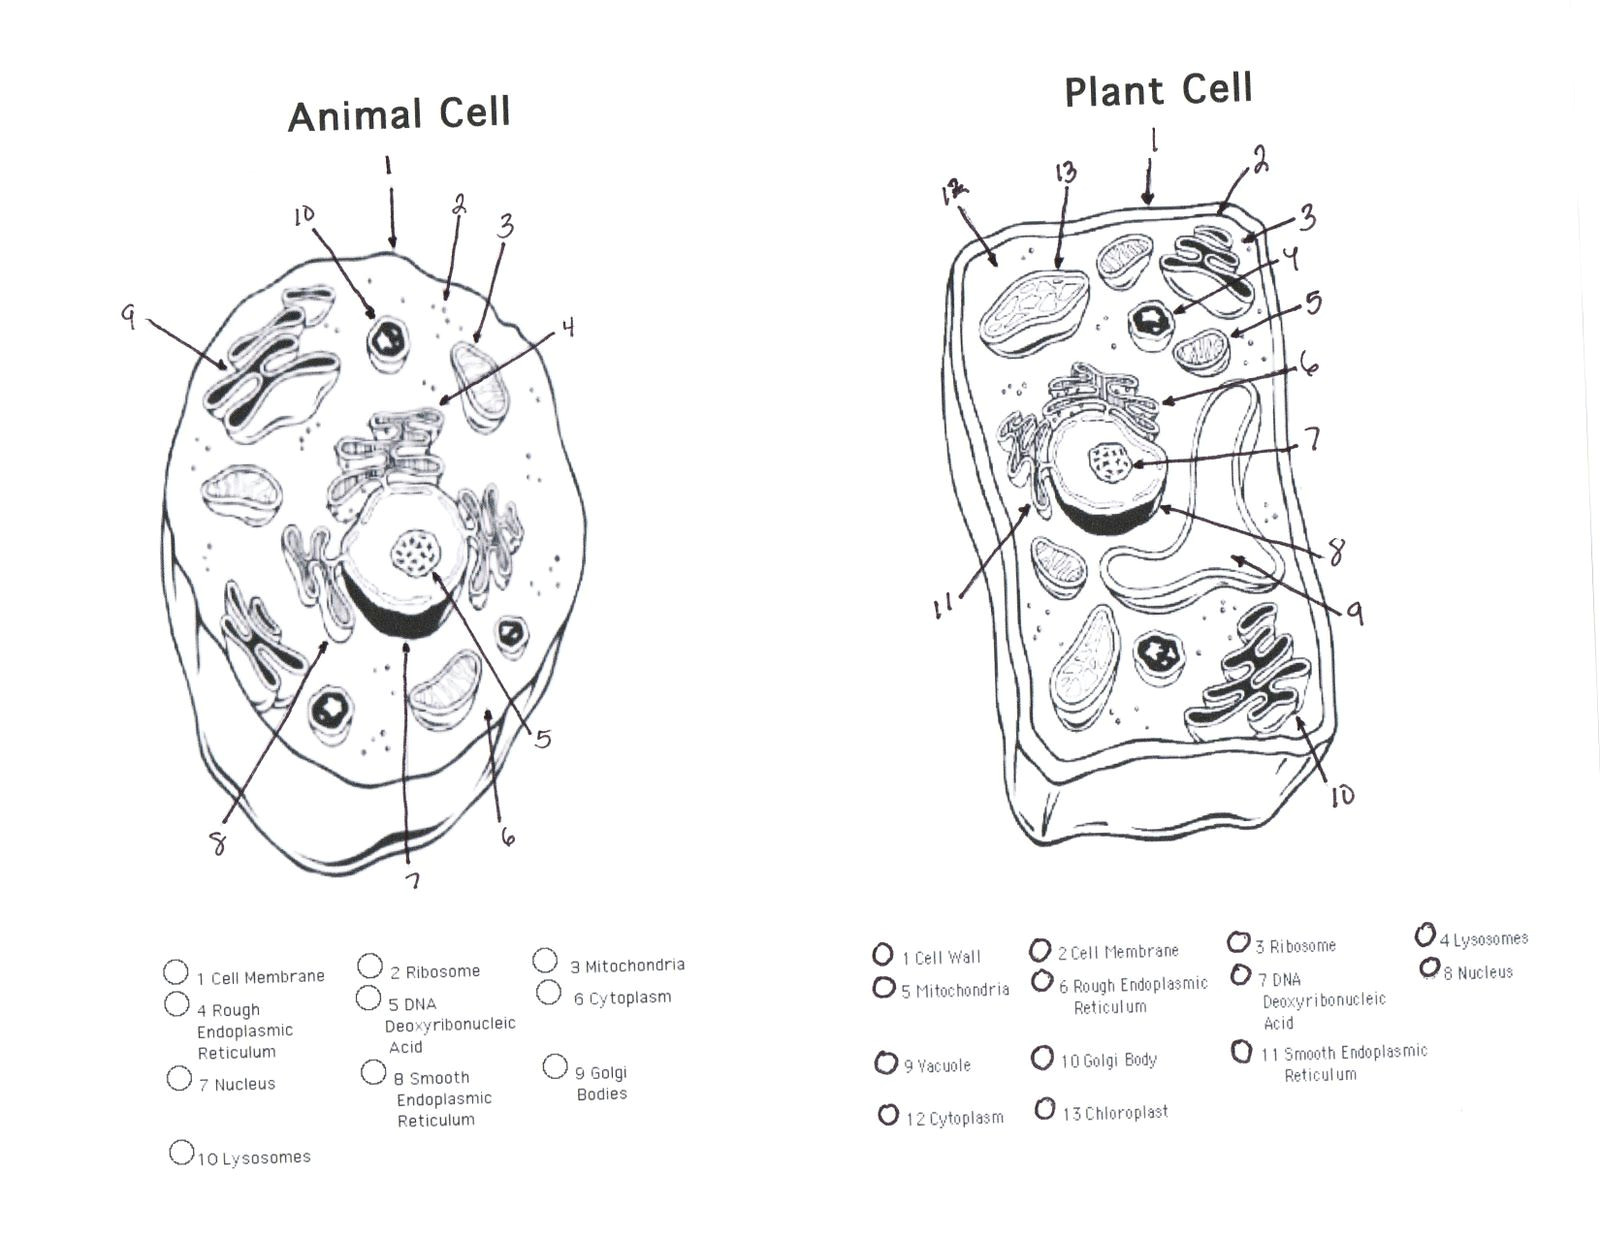 Animal Cell and Plant Cell Drawing Plant and Animal Cell Diagram Unlabeled Printable Diagram